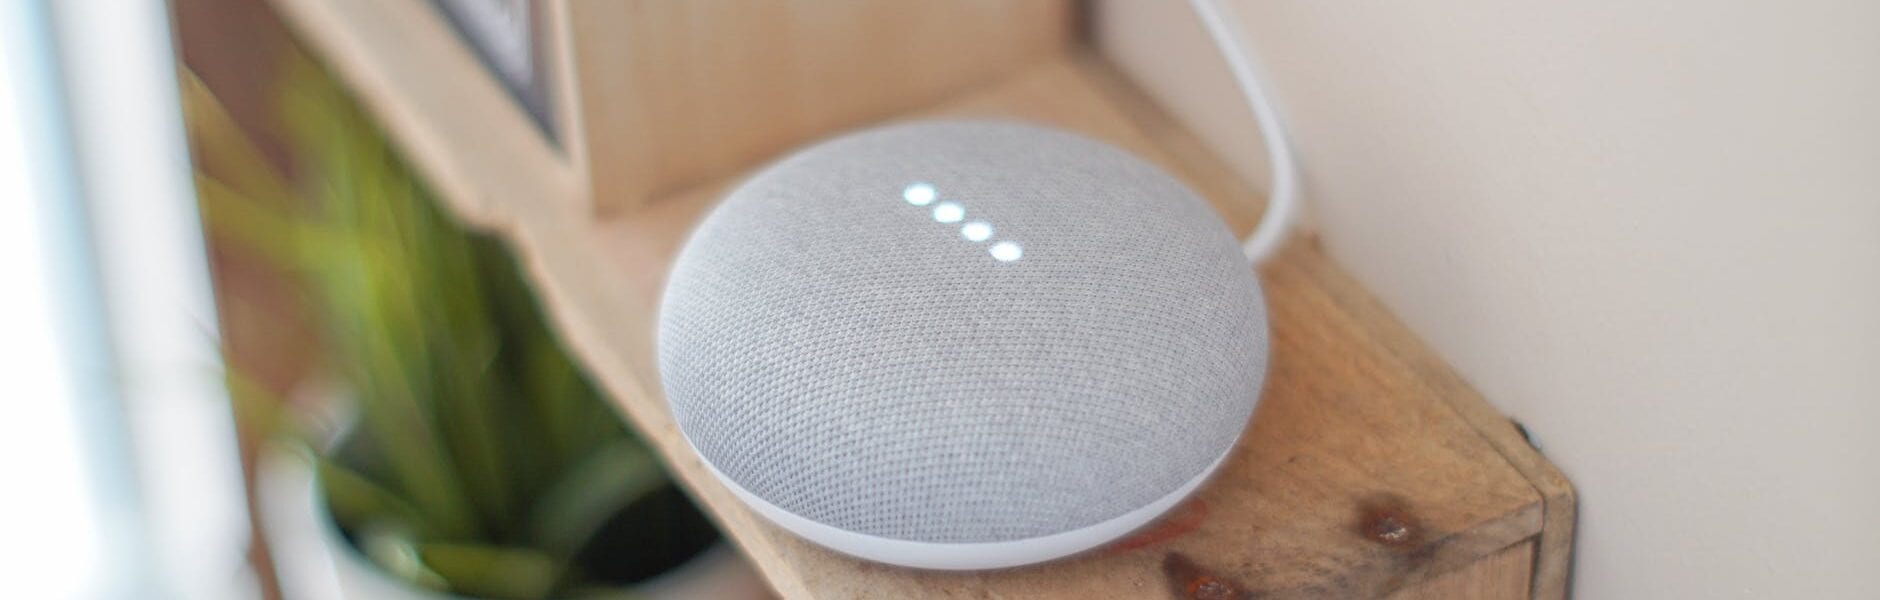 A Picture of a Google Smart Speaker